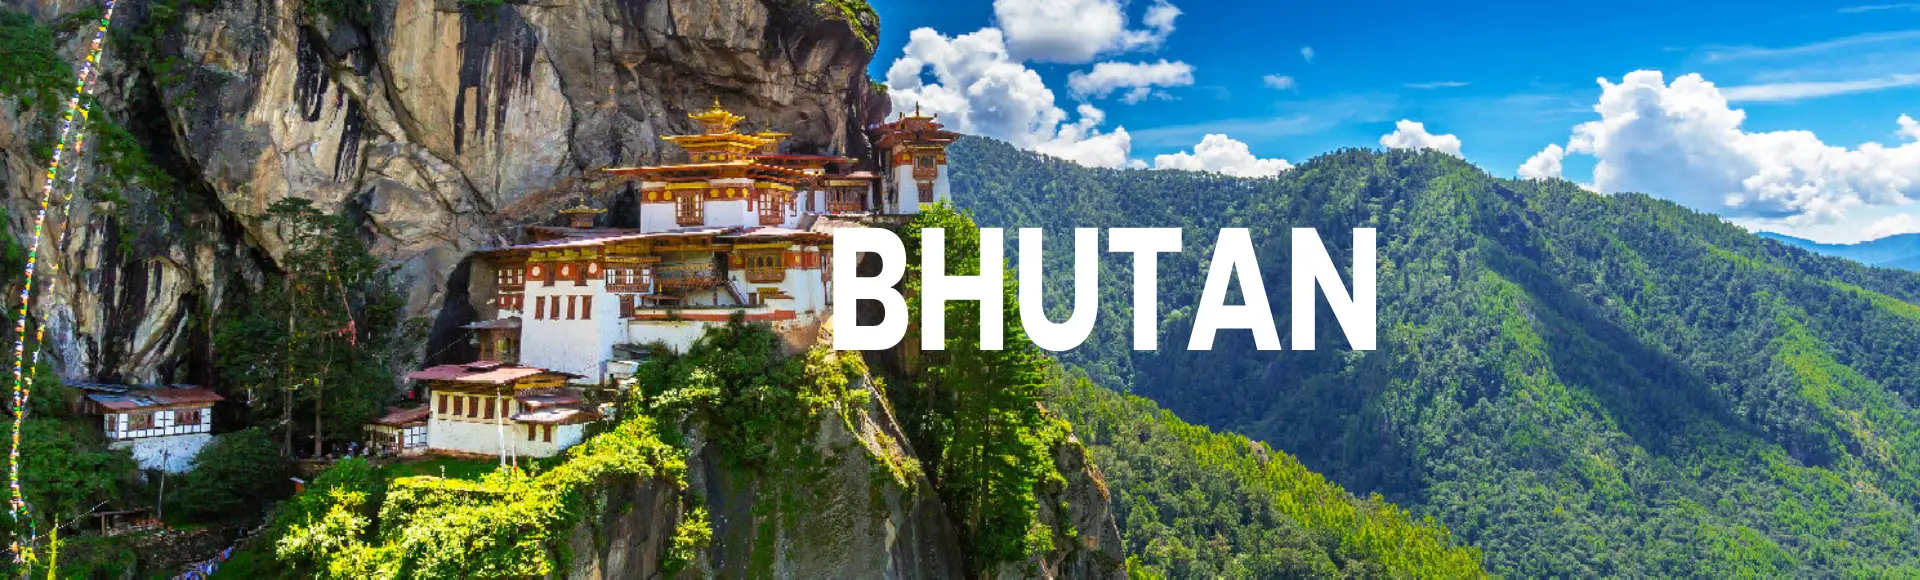 Bhutan tours holiday packages